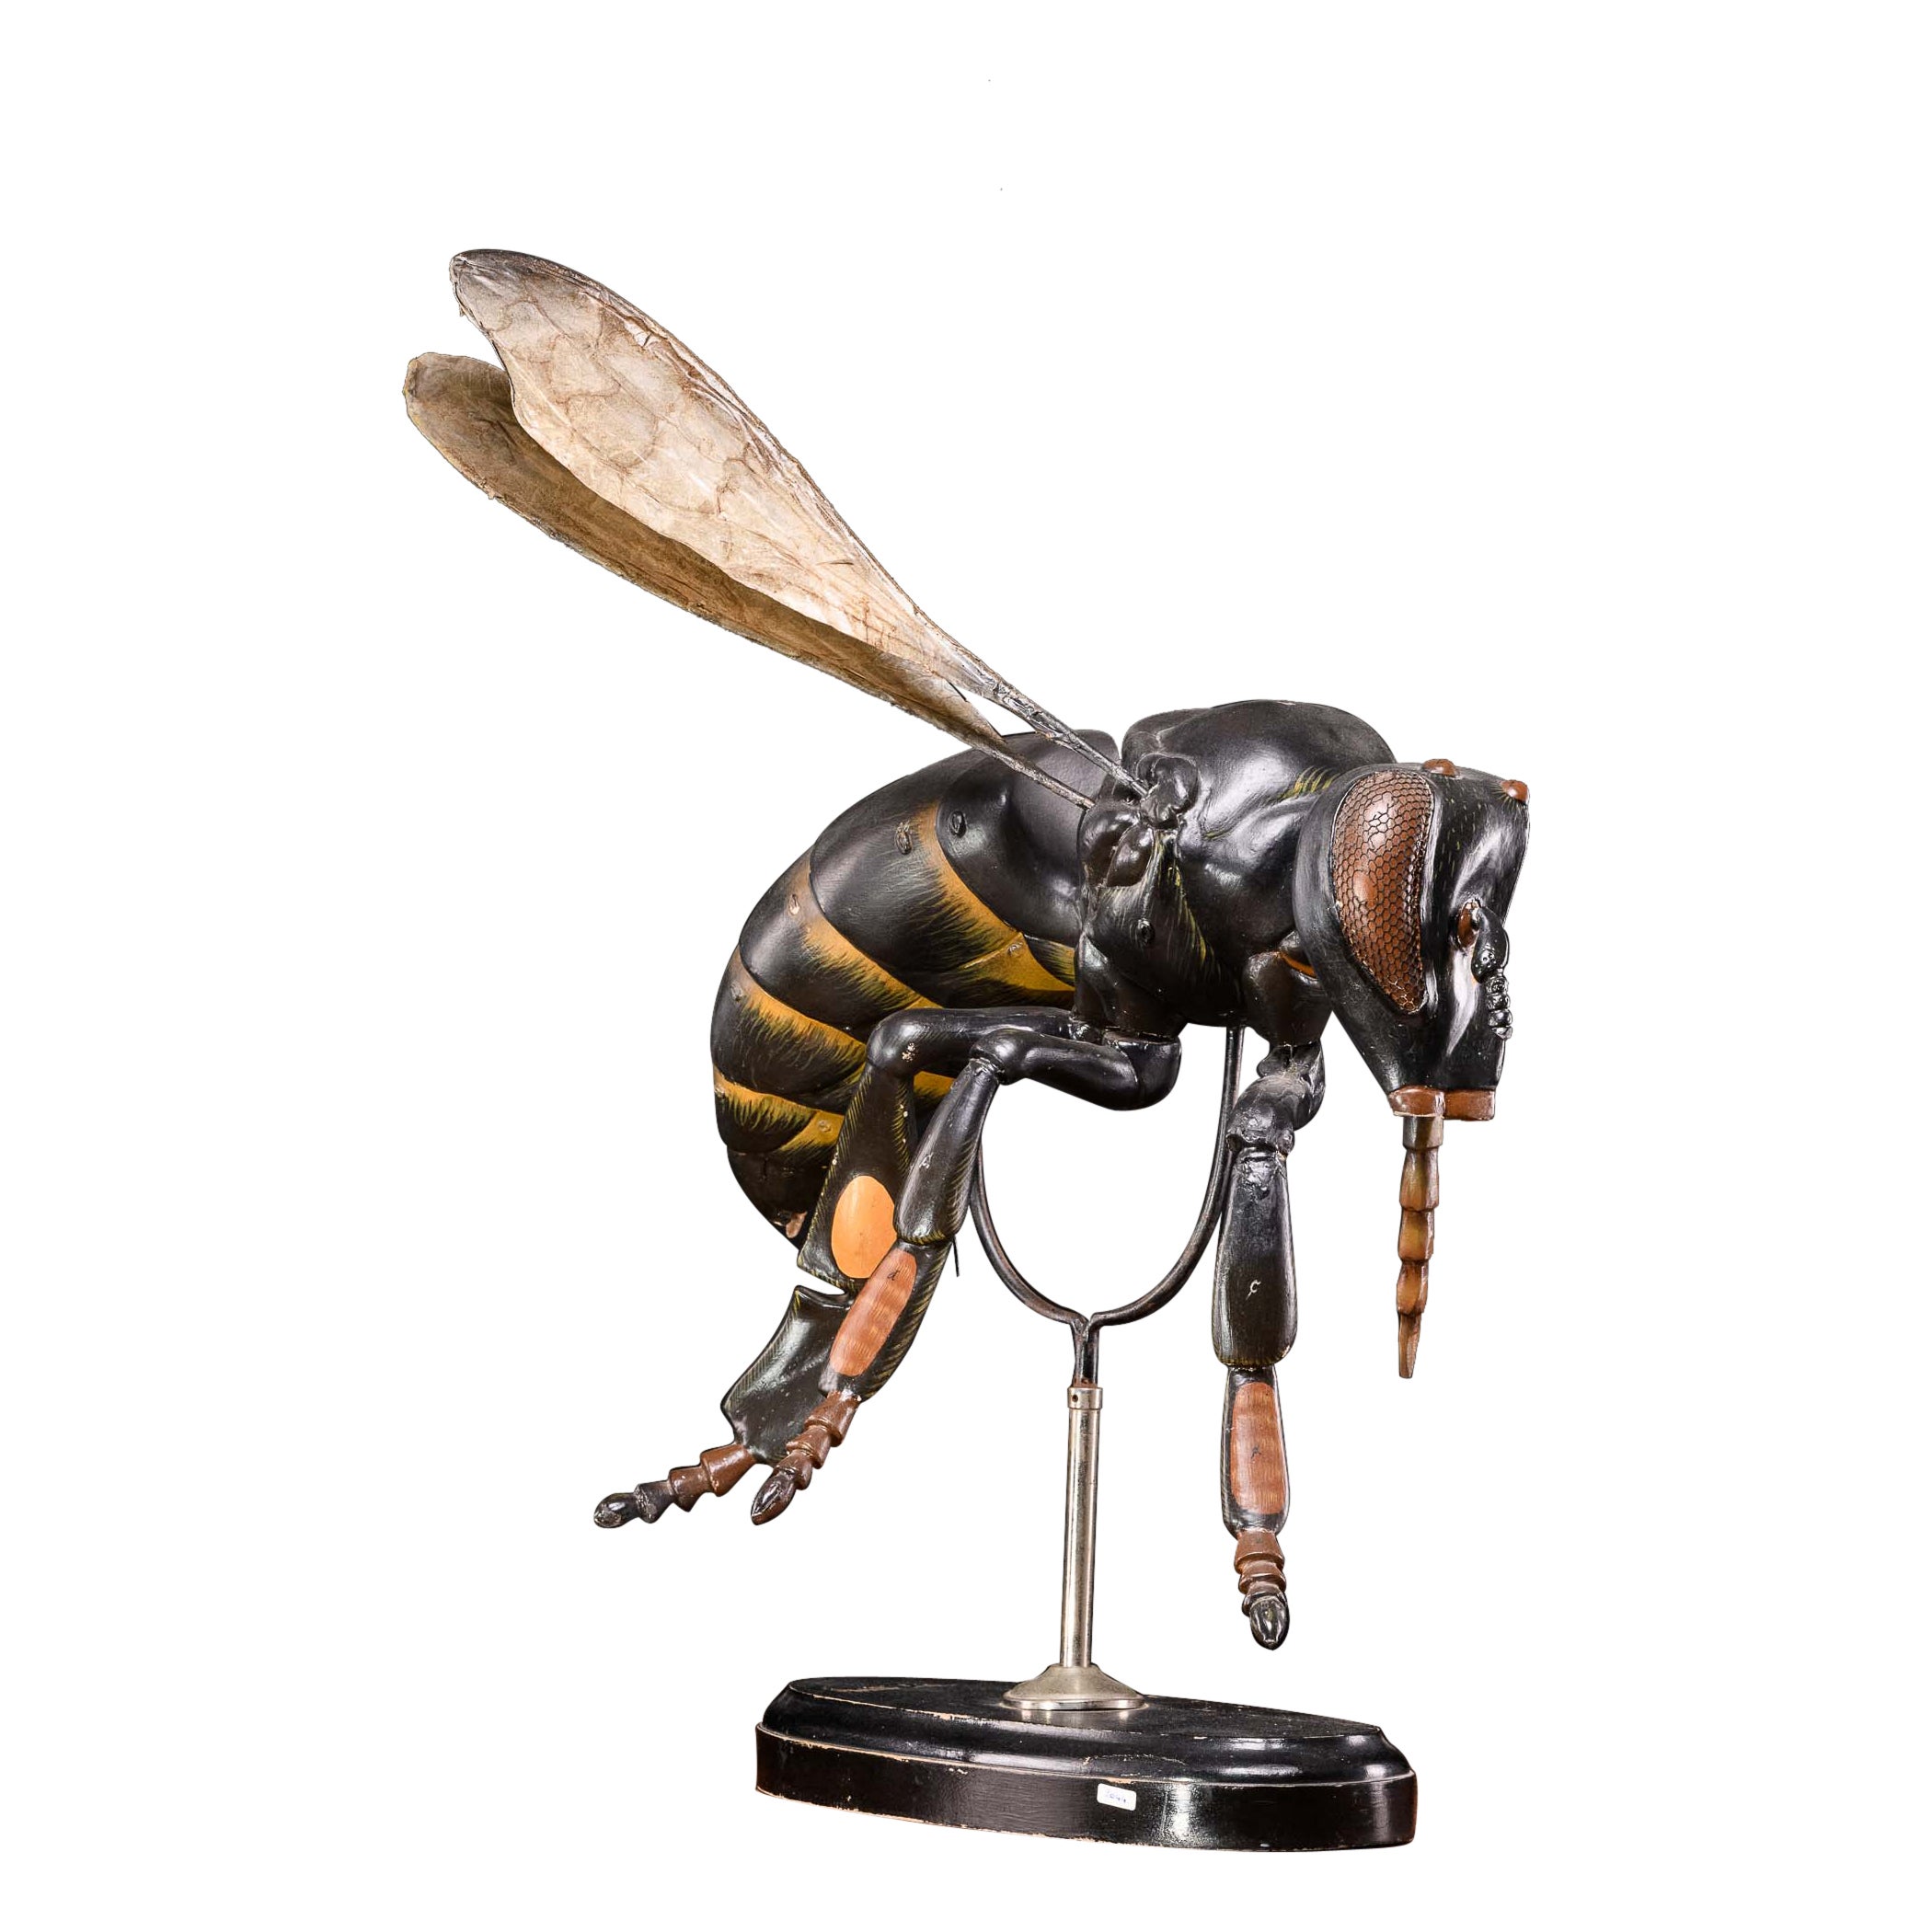 Large Didactical Model of a Bee labeled “ Denoyer-Geppert Company of Chicago " 